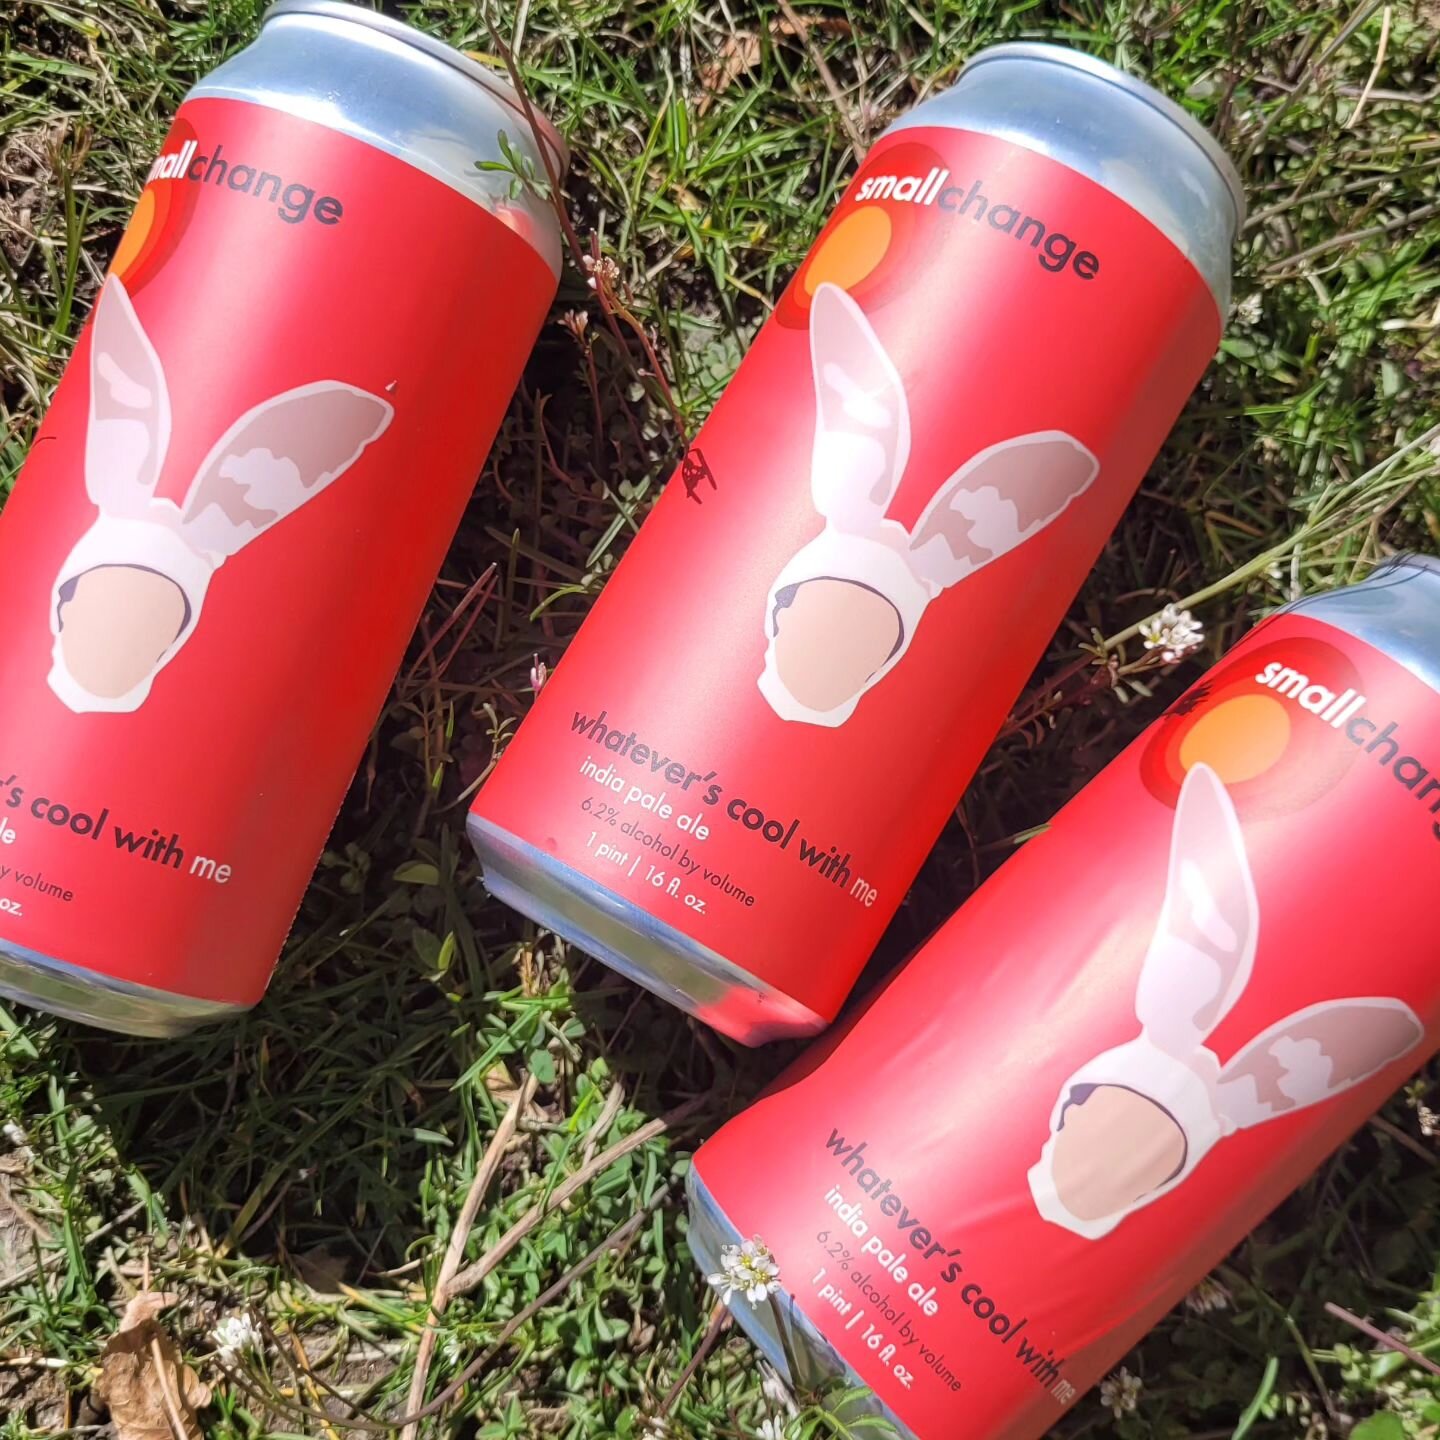 Fresh cans (and kegs) of Whatever's Cool With Me out now. Guaranteed to be the coolest guy in bunny ears you see this Easter weekend.